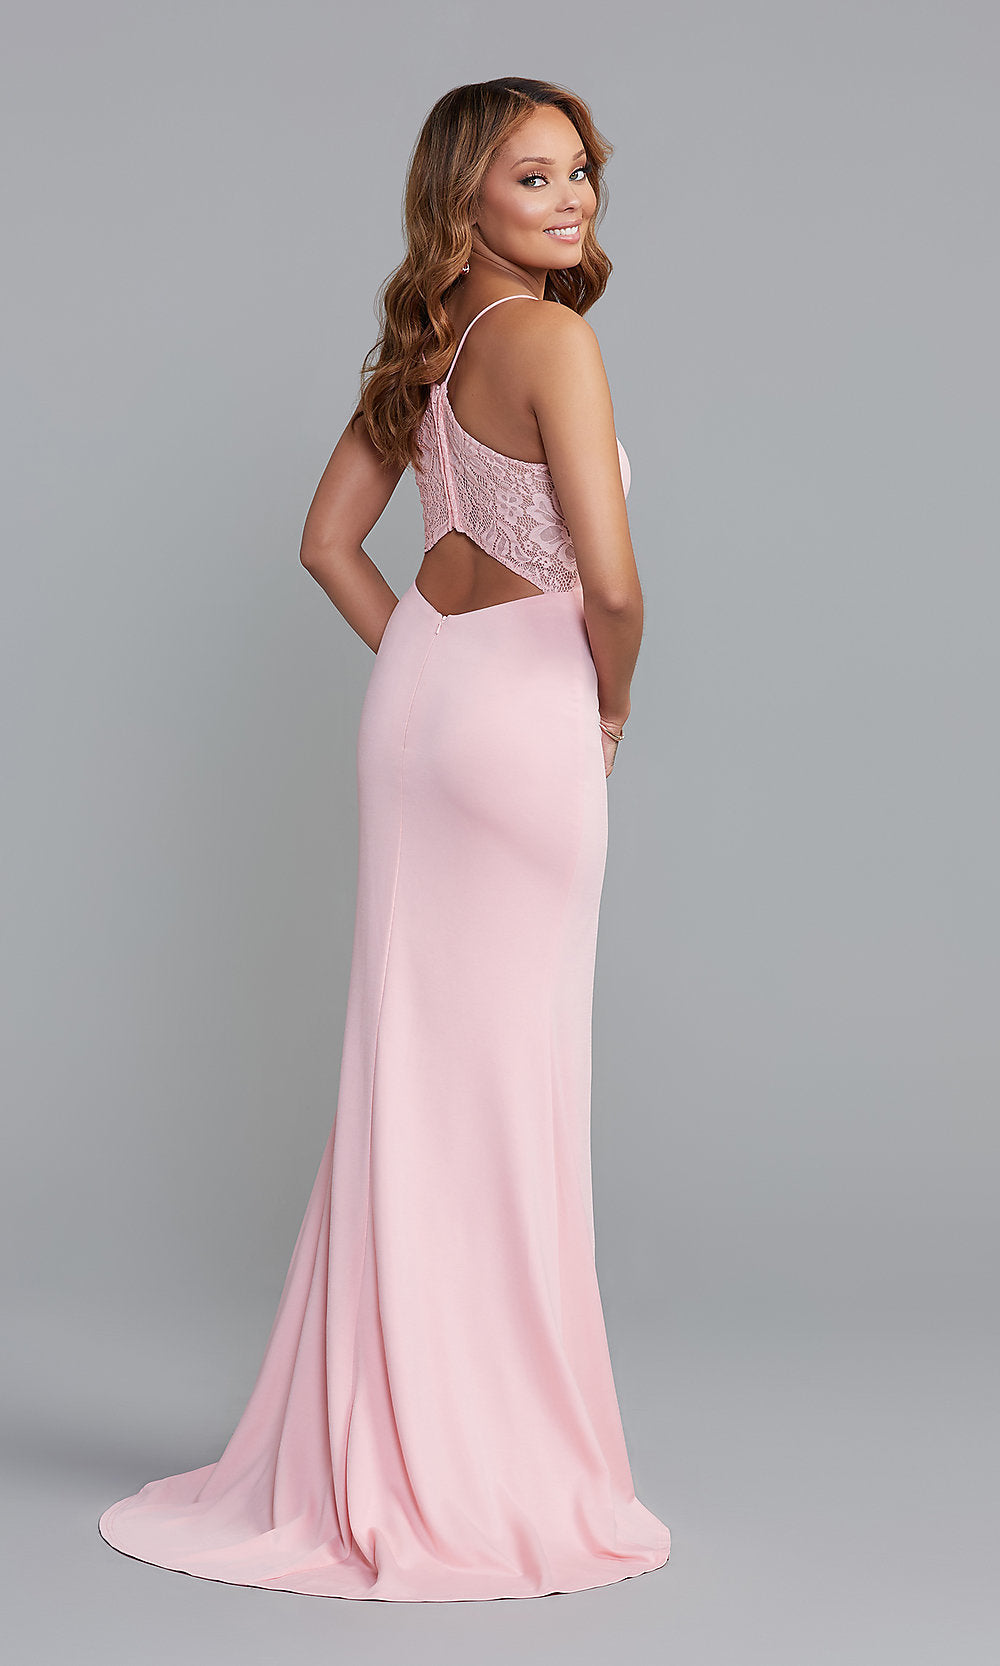  Rose Pink Long Formal Dress with Lace Back